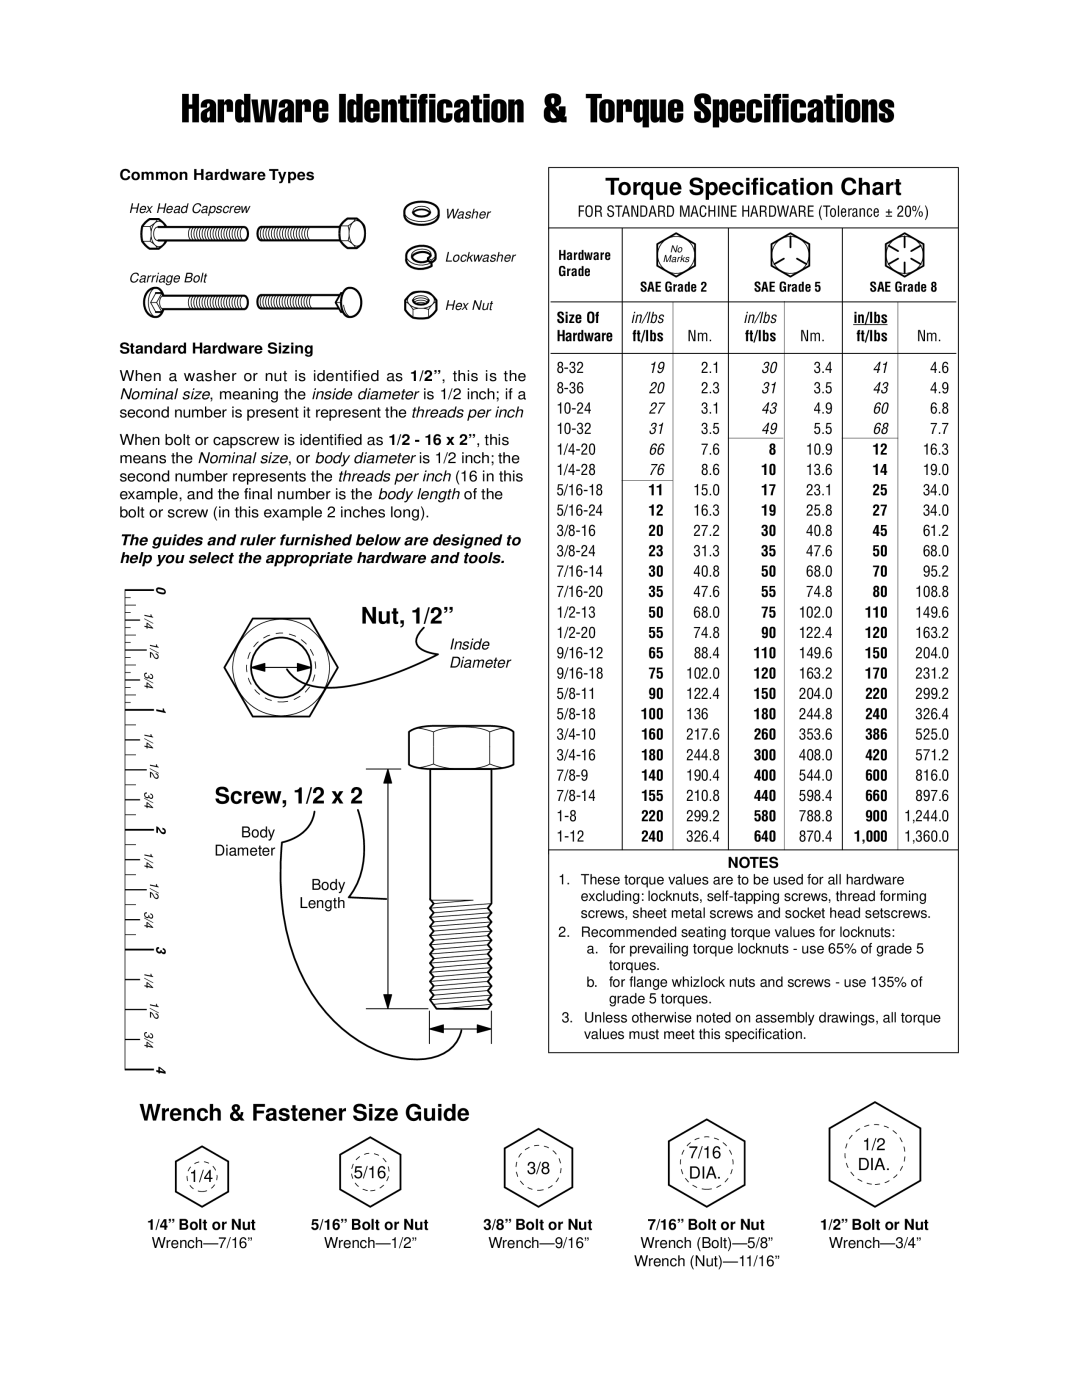 Simplicity 1694920 Wrench & Fastener Size Guide, 7/16, 5/16, Hardware Identification & Torque Specifications, Nut, 1/2” 